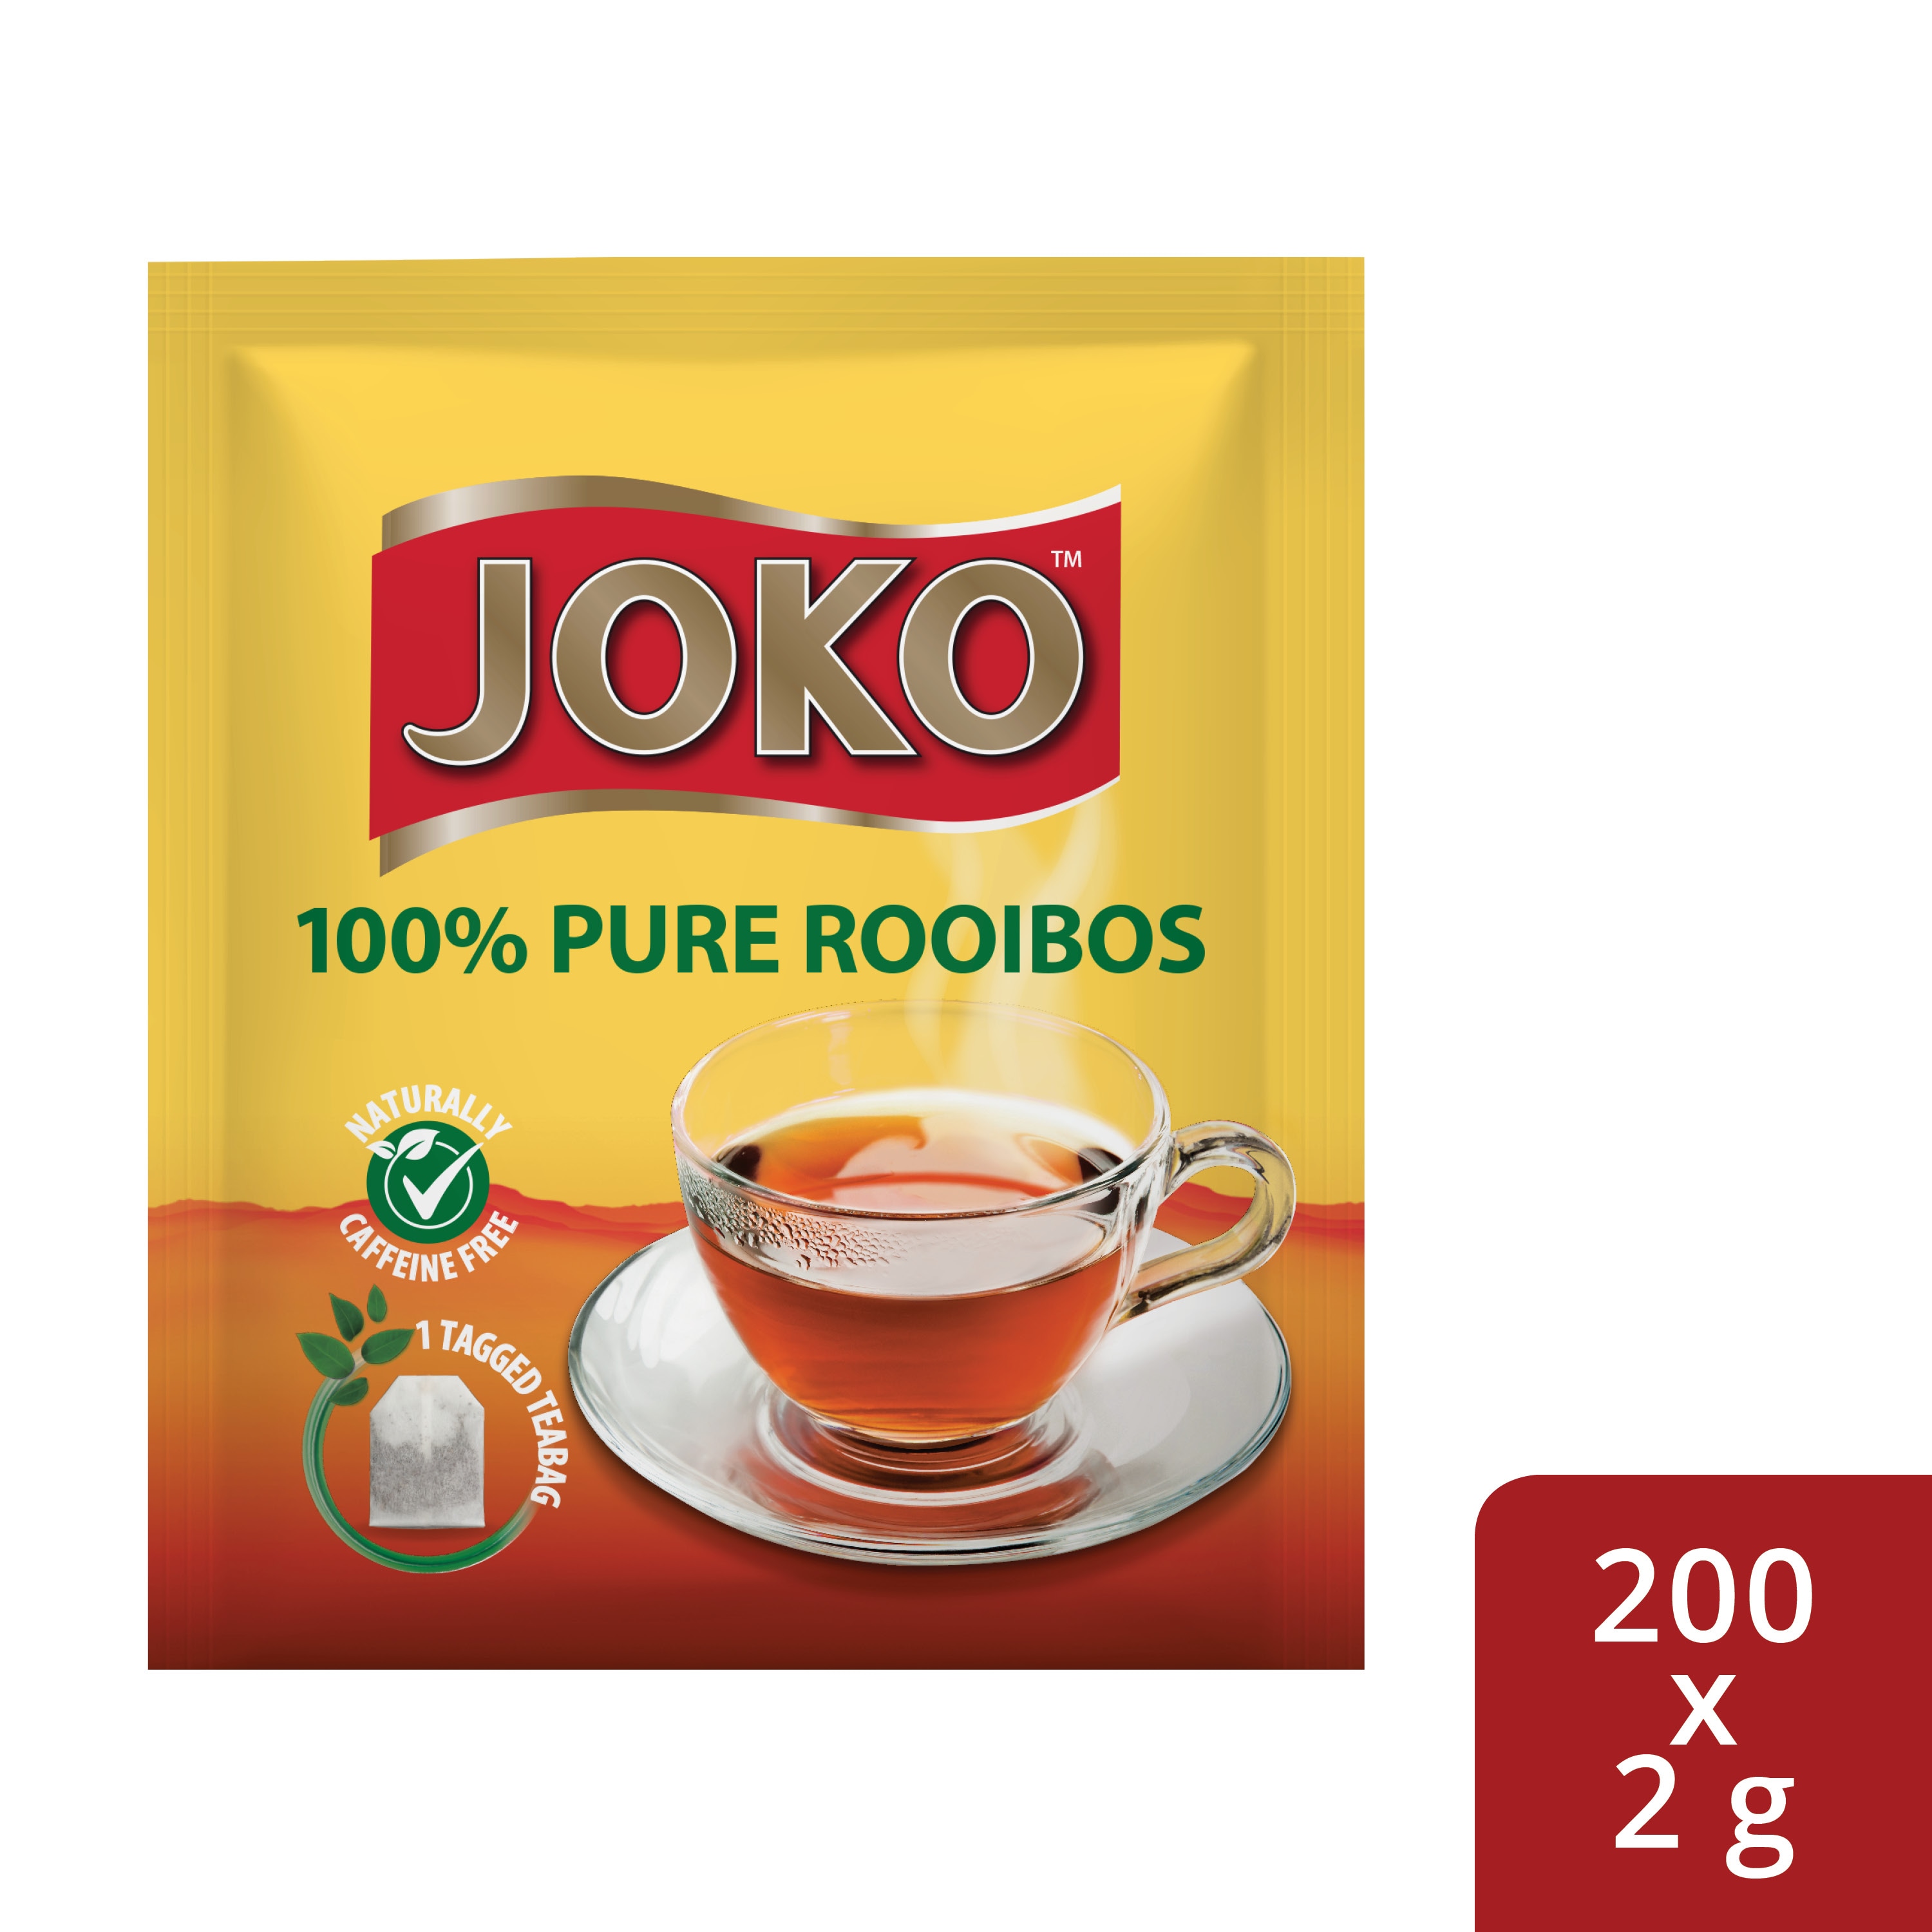 JOKO 100% Pure Rooibos 200 x 2 g Envelopes - Joko offers an enveloped Black & 100% Pure Rooibos that your guests will enjoy. 